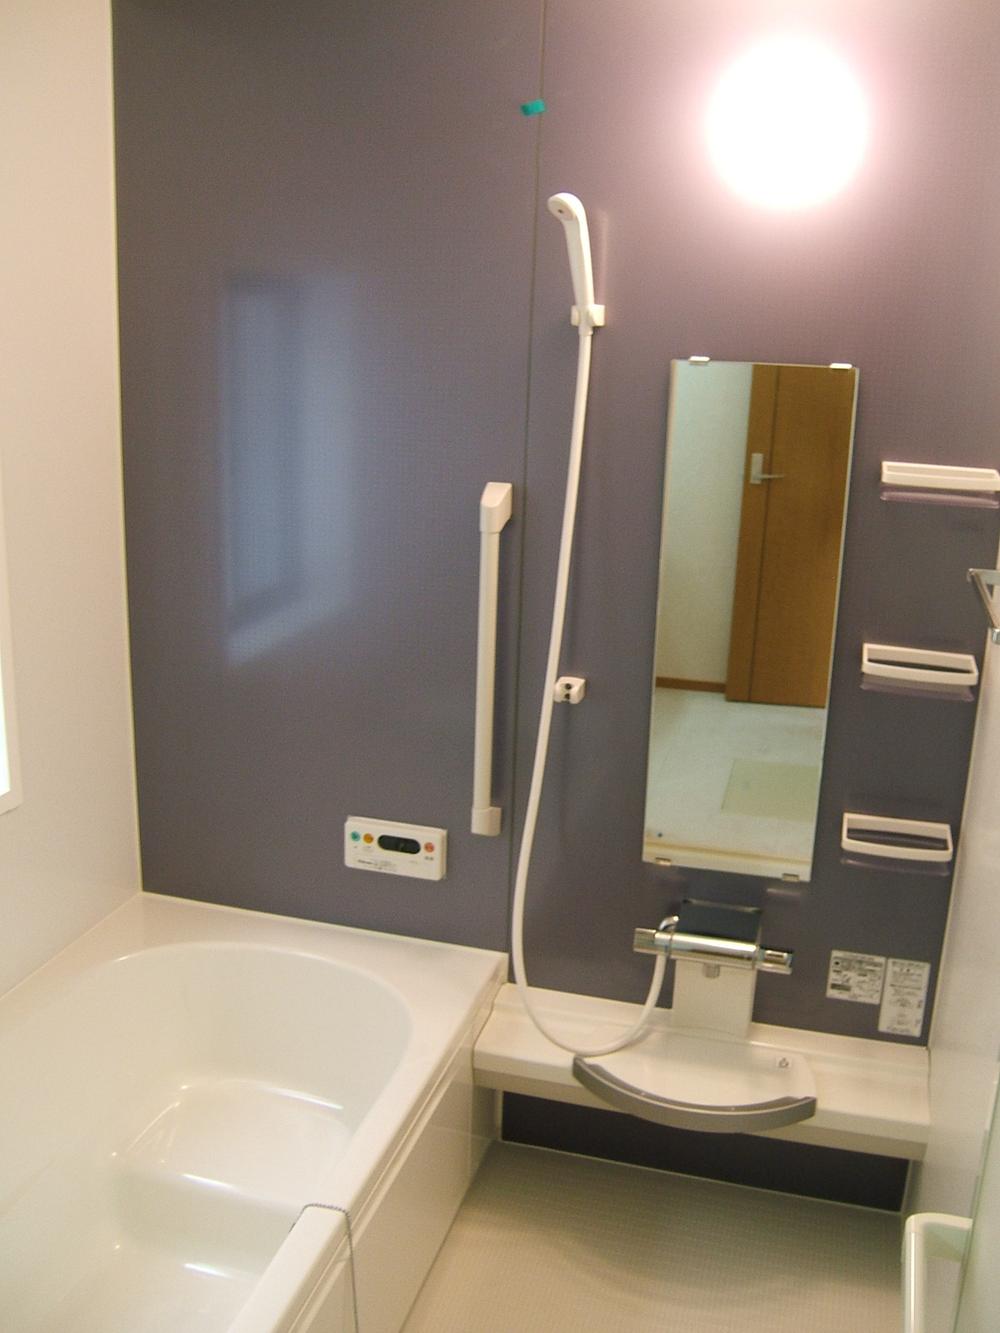 Same specifications photo (bathroom). The company specification